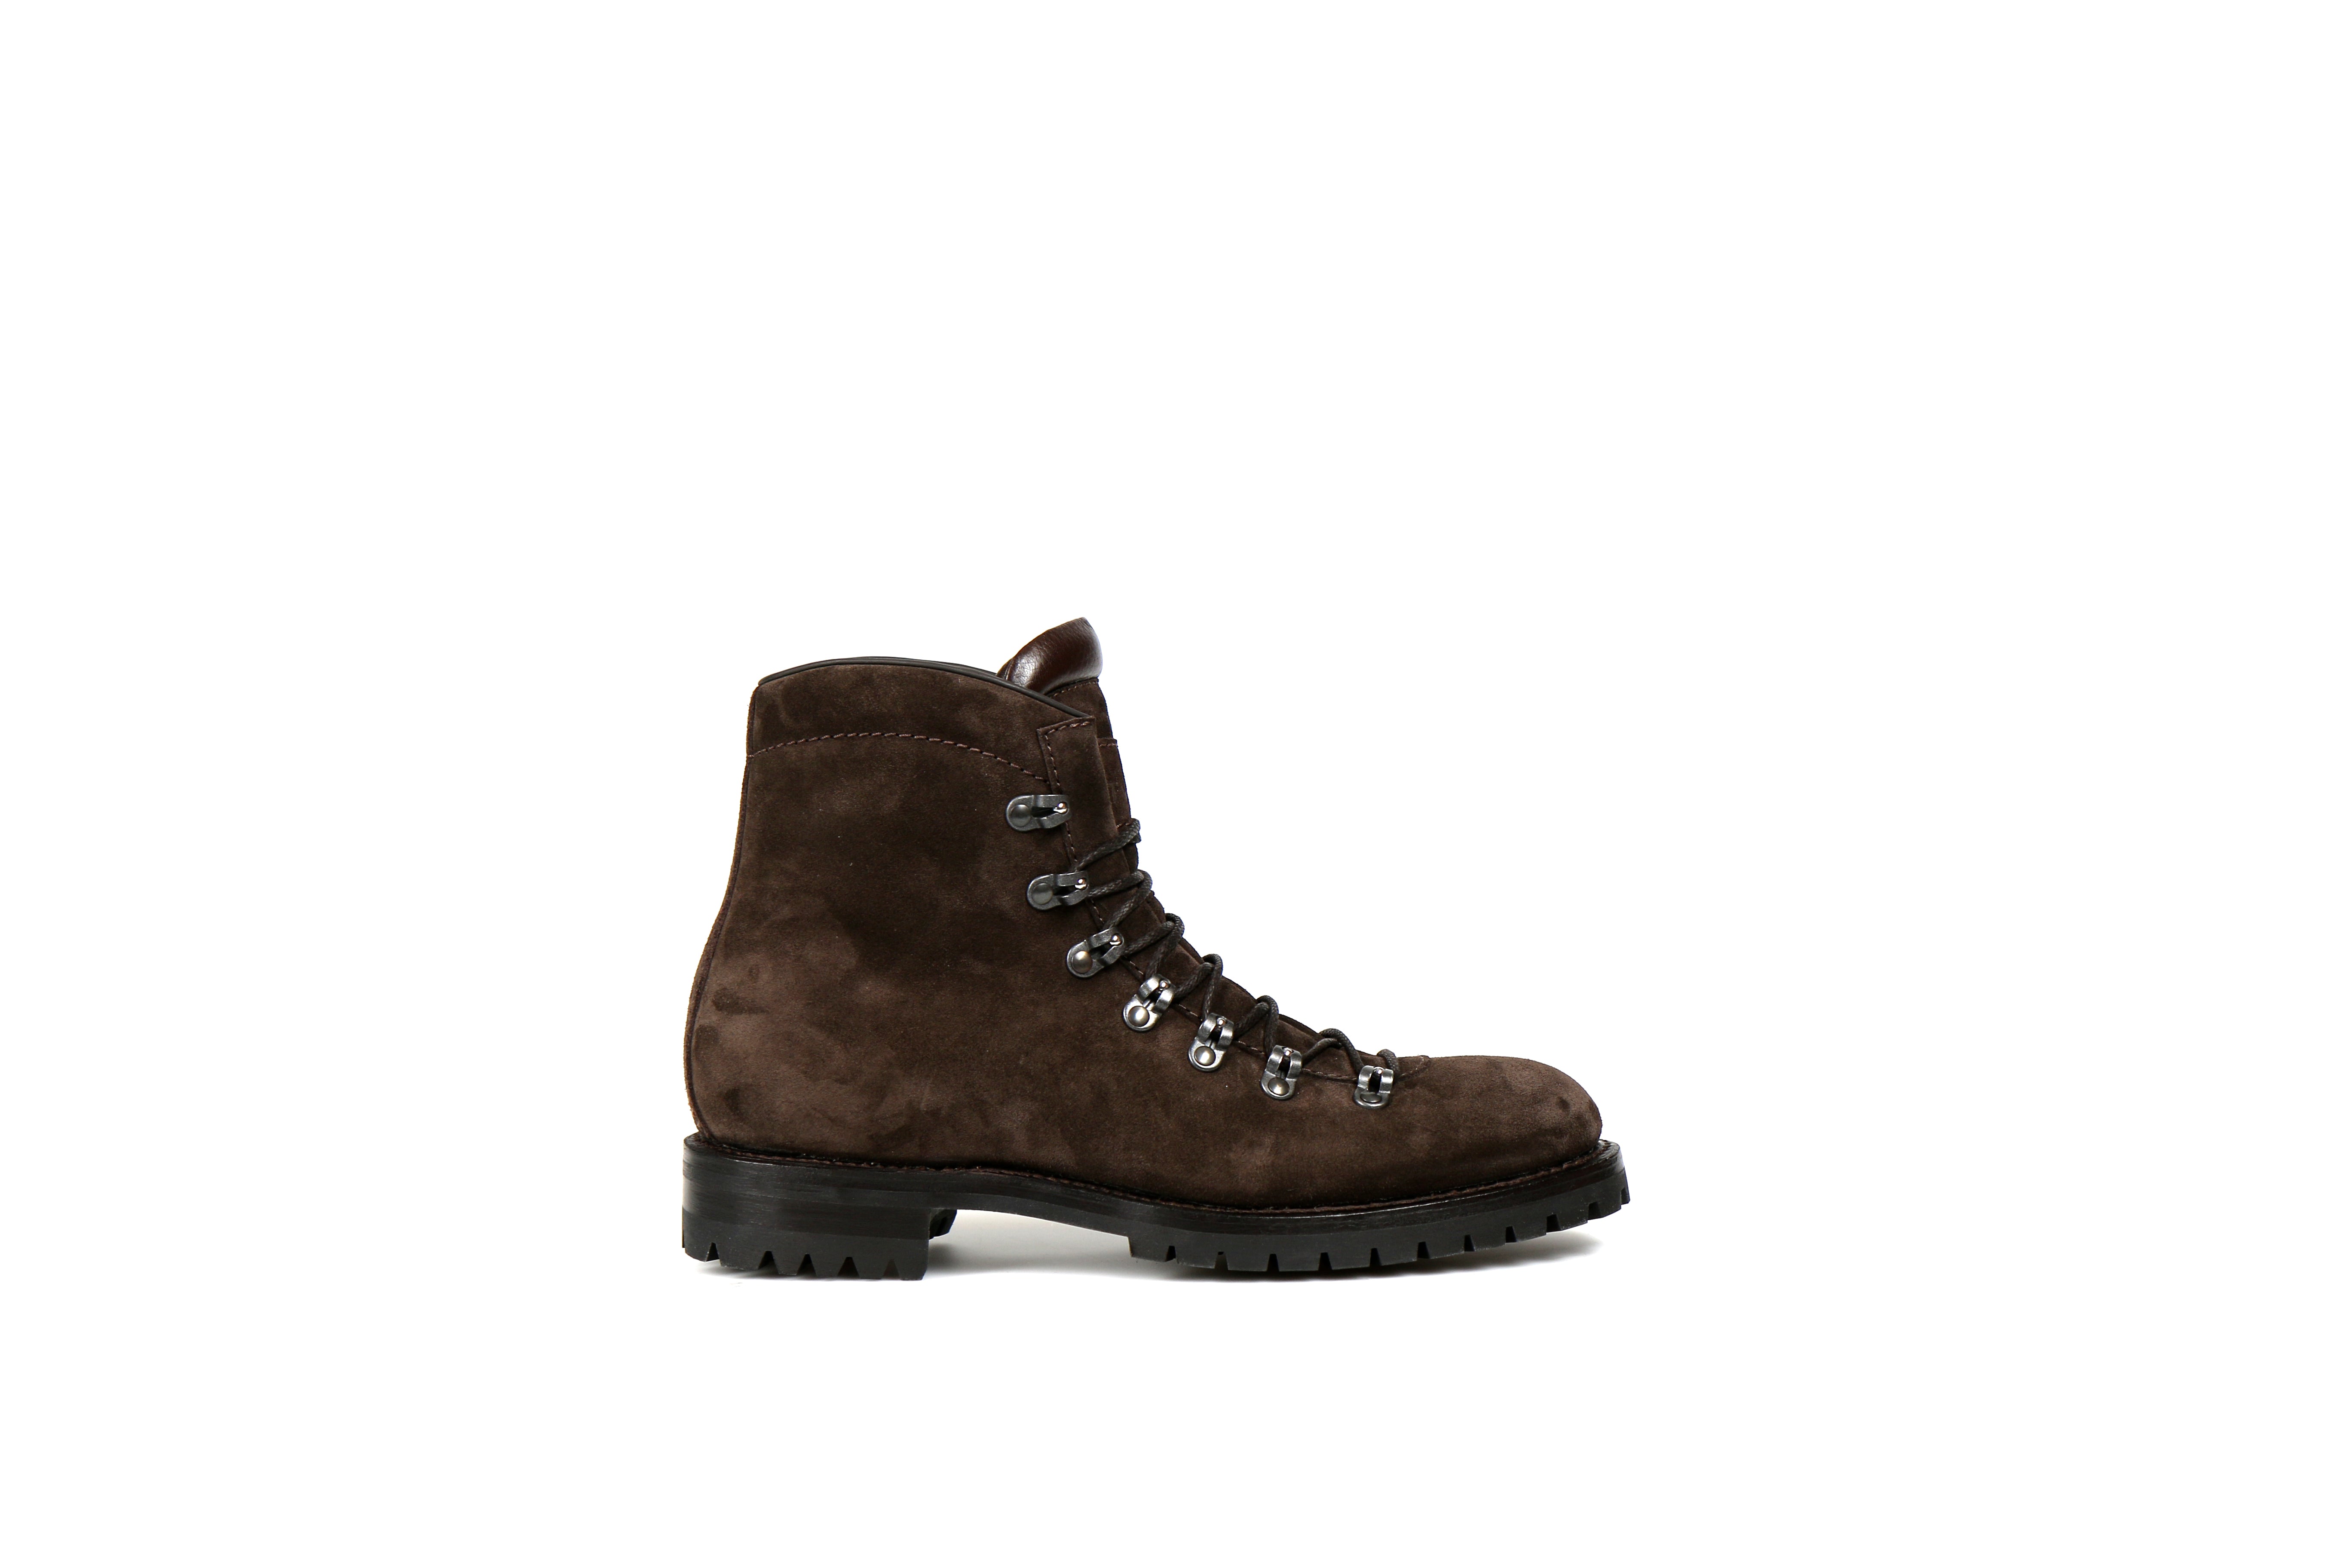 Kings Coffee Suede Leather Hiking Boots